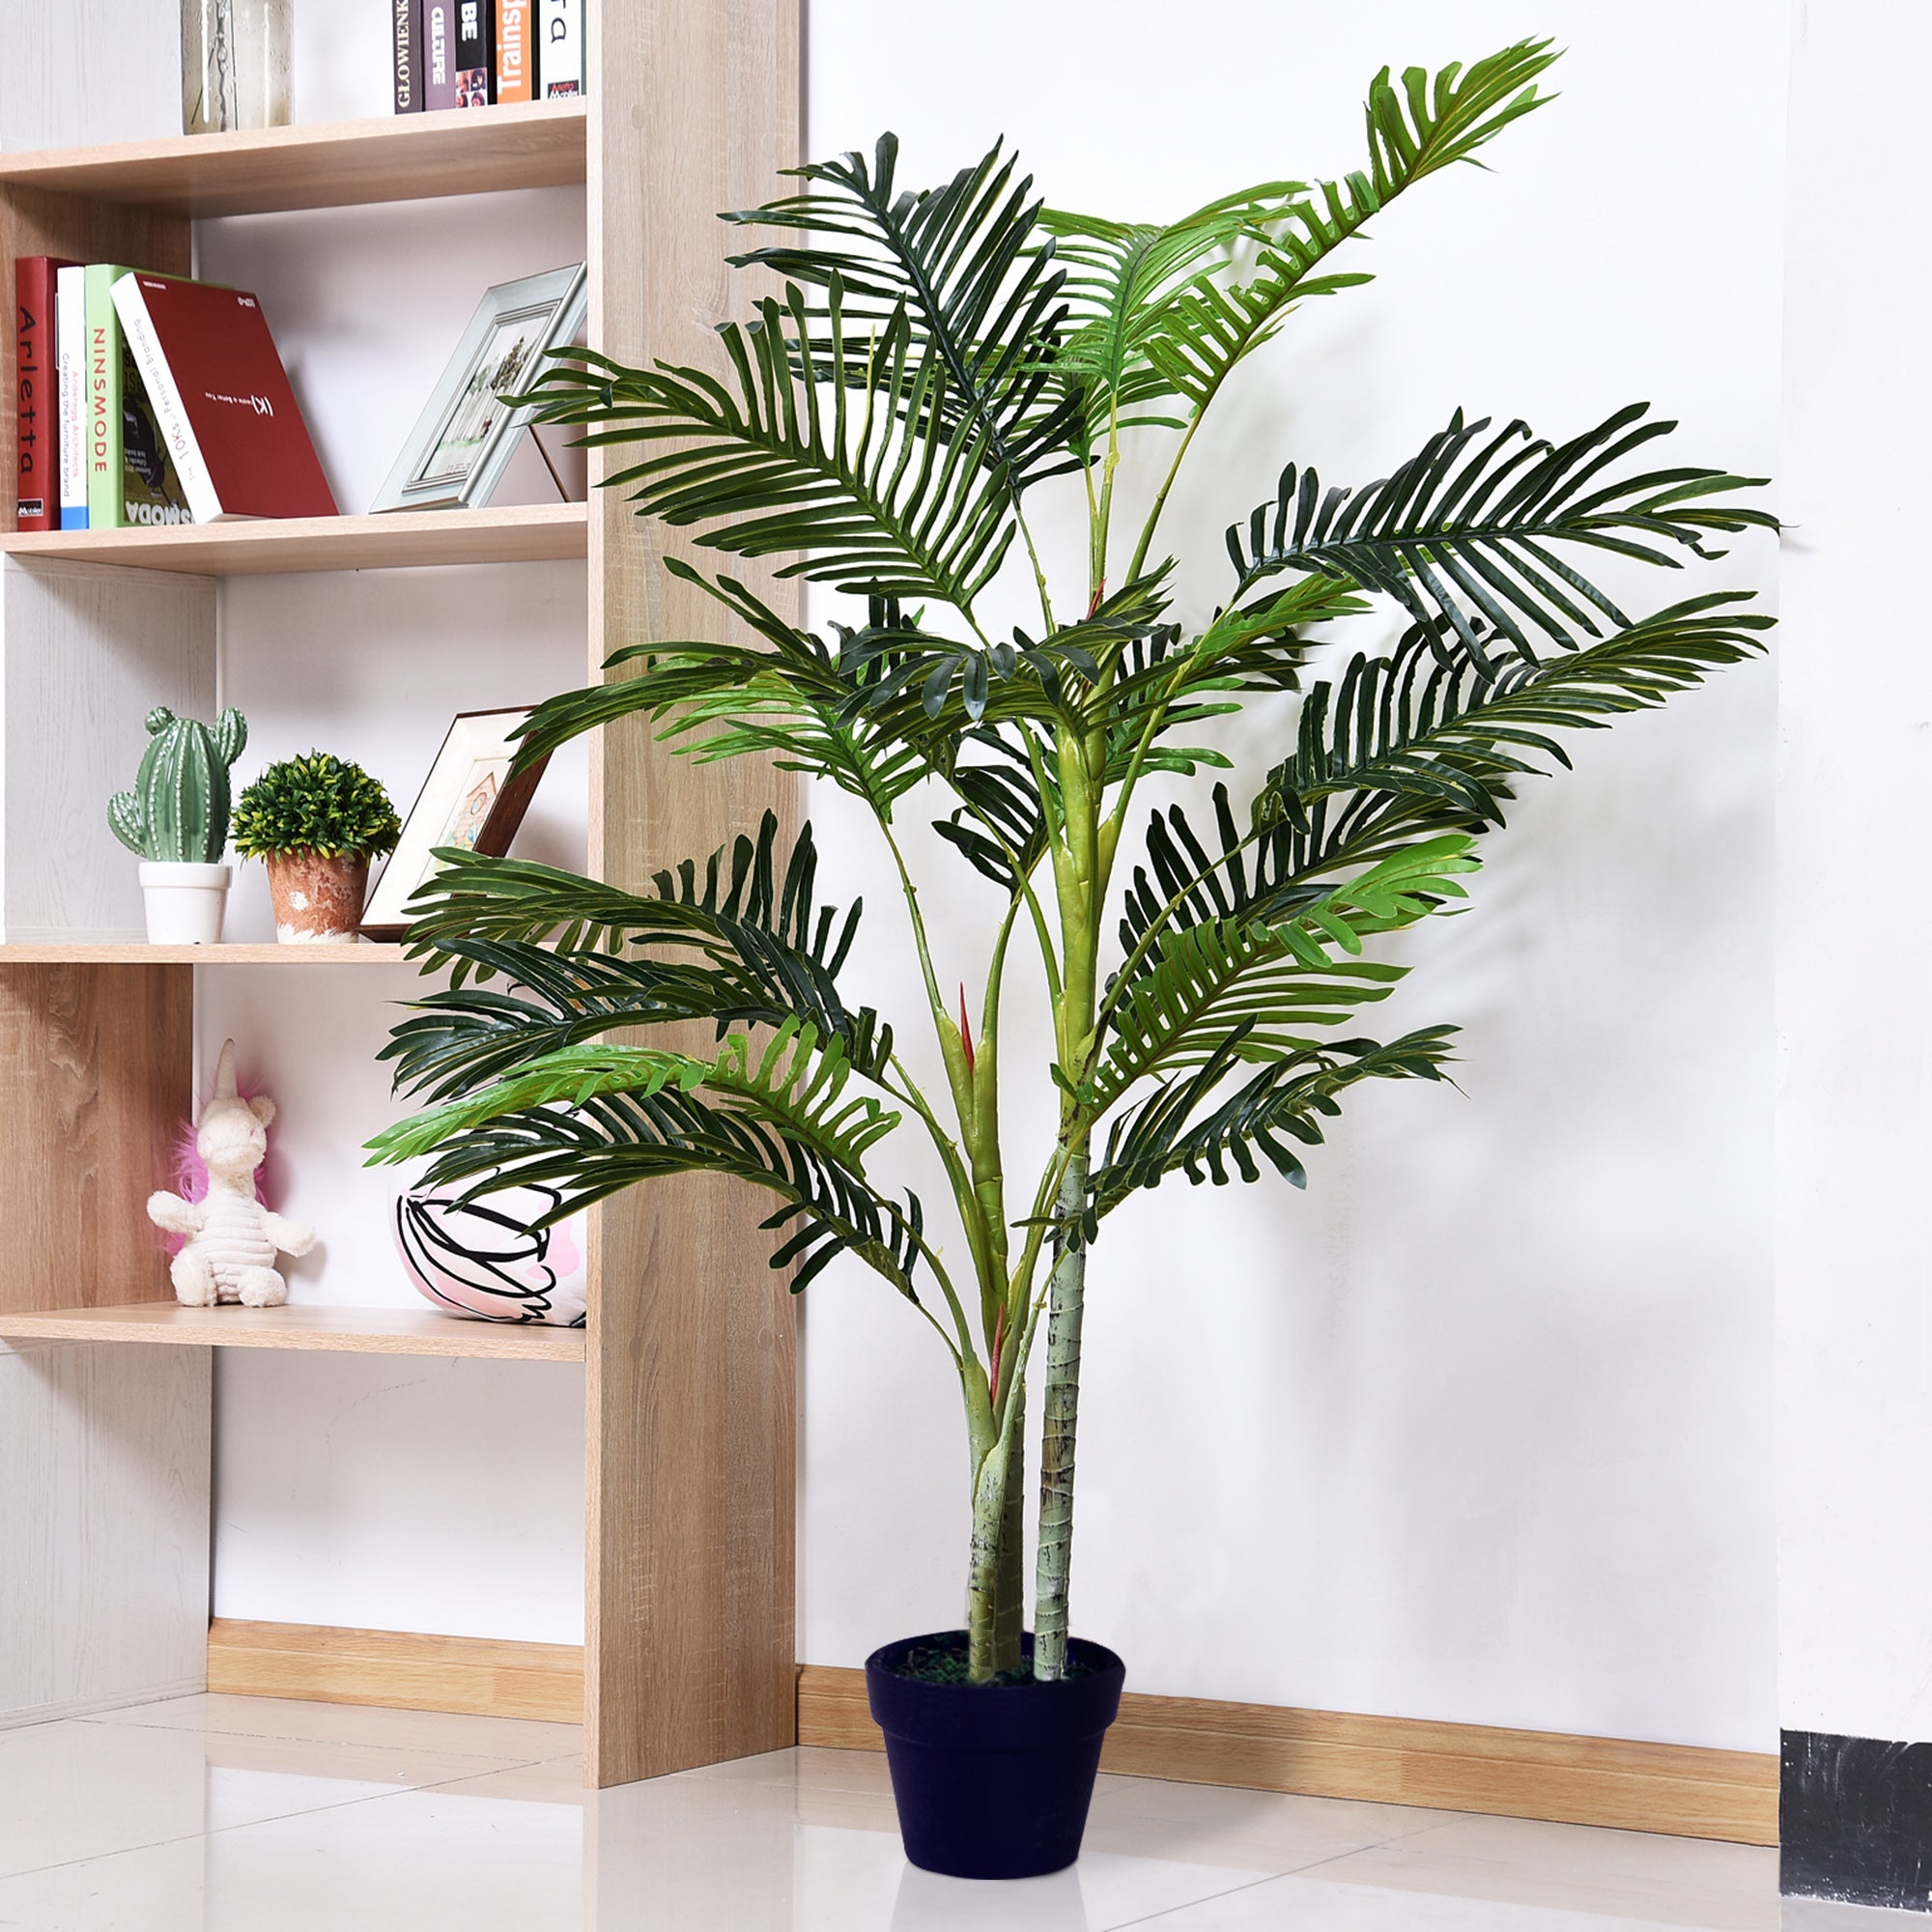 150cm(5ft) Artificial Palm Tree Decorative Indoor Faux Green Plant w/Leaves Home Décor Tropical Potted Home Office-1